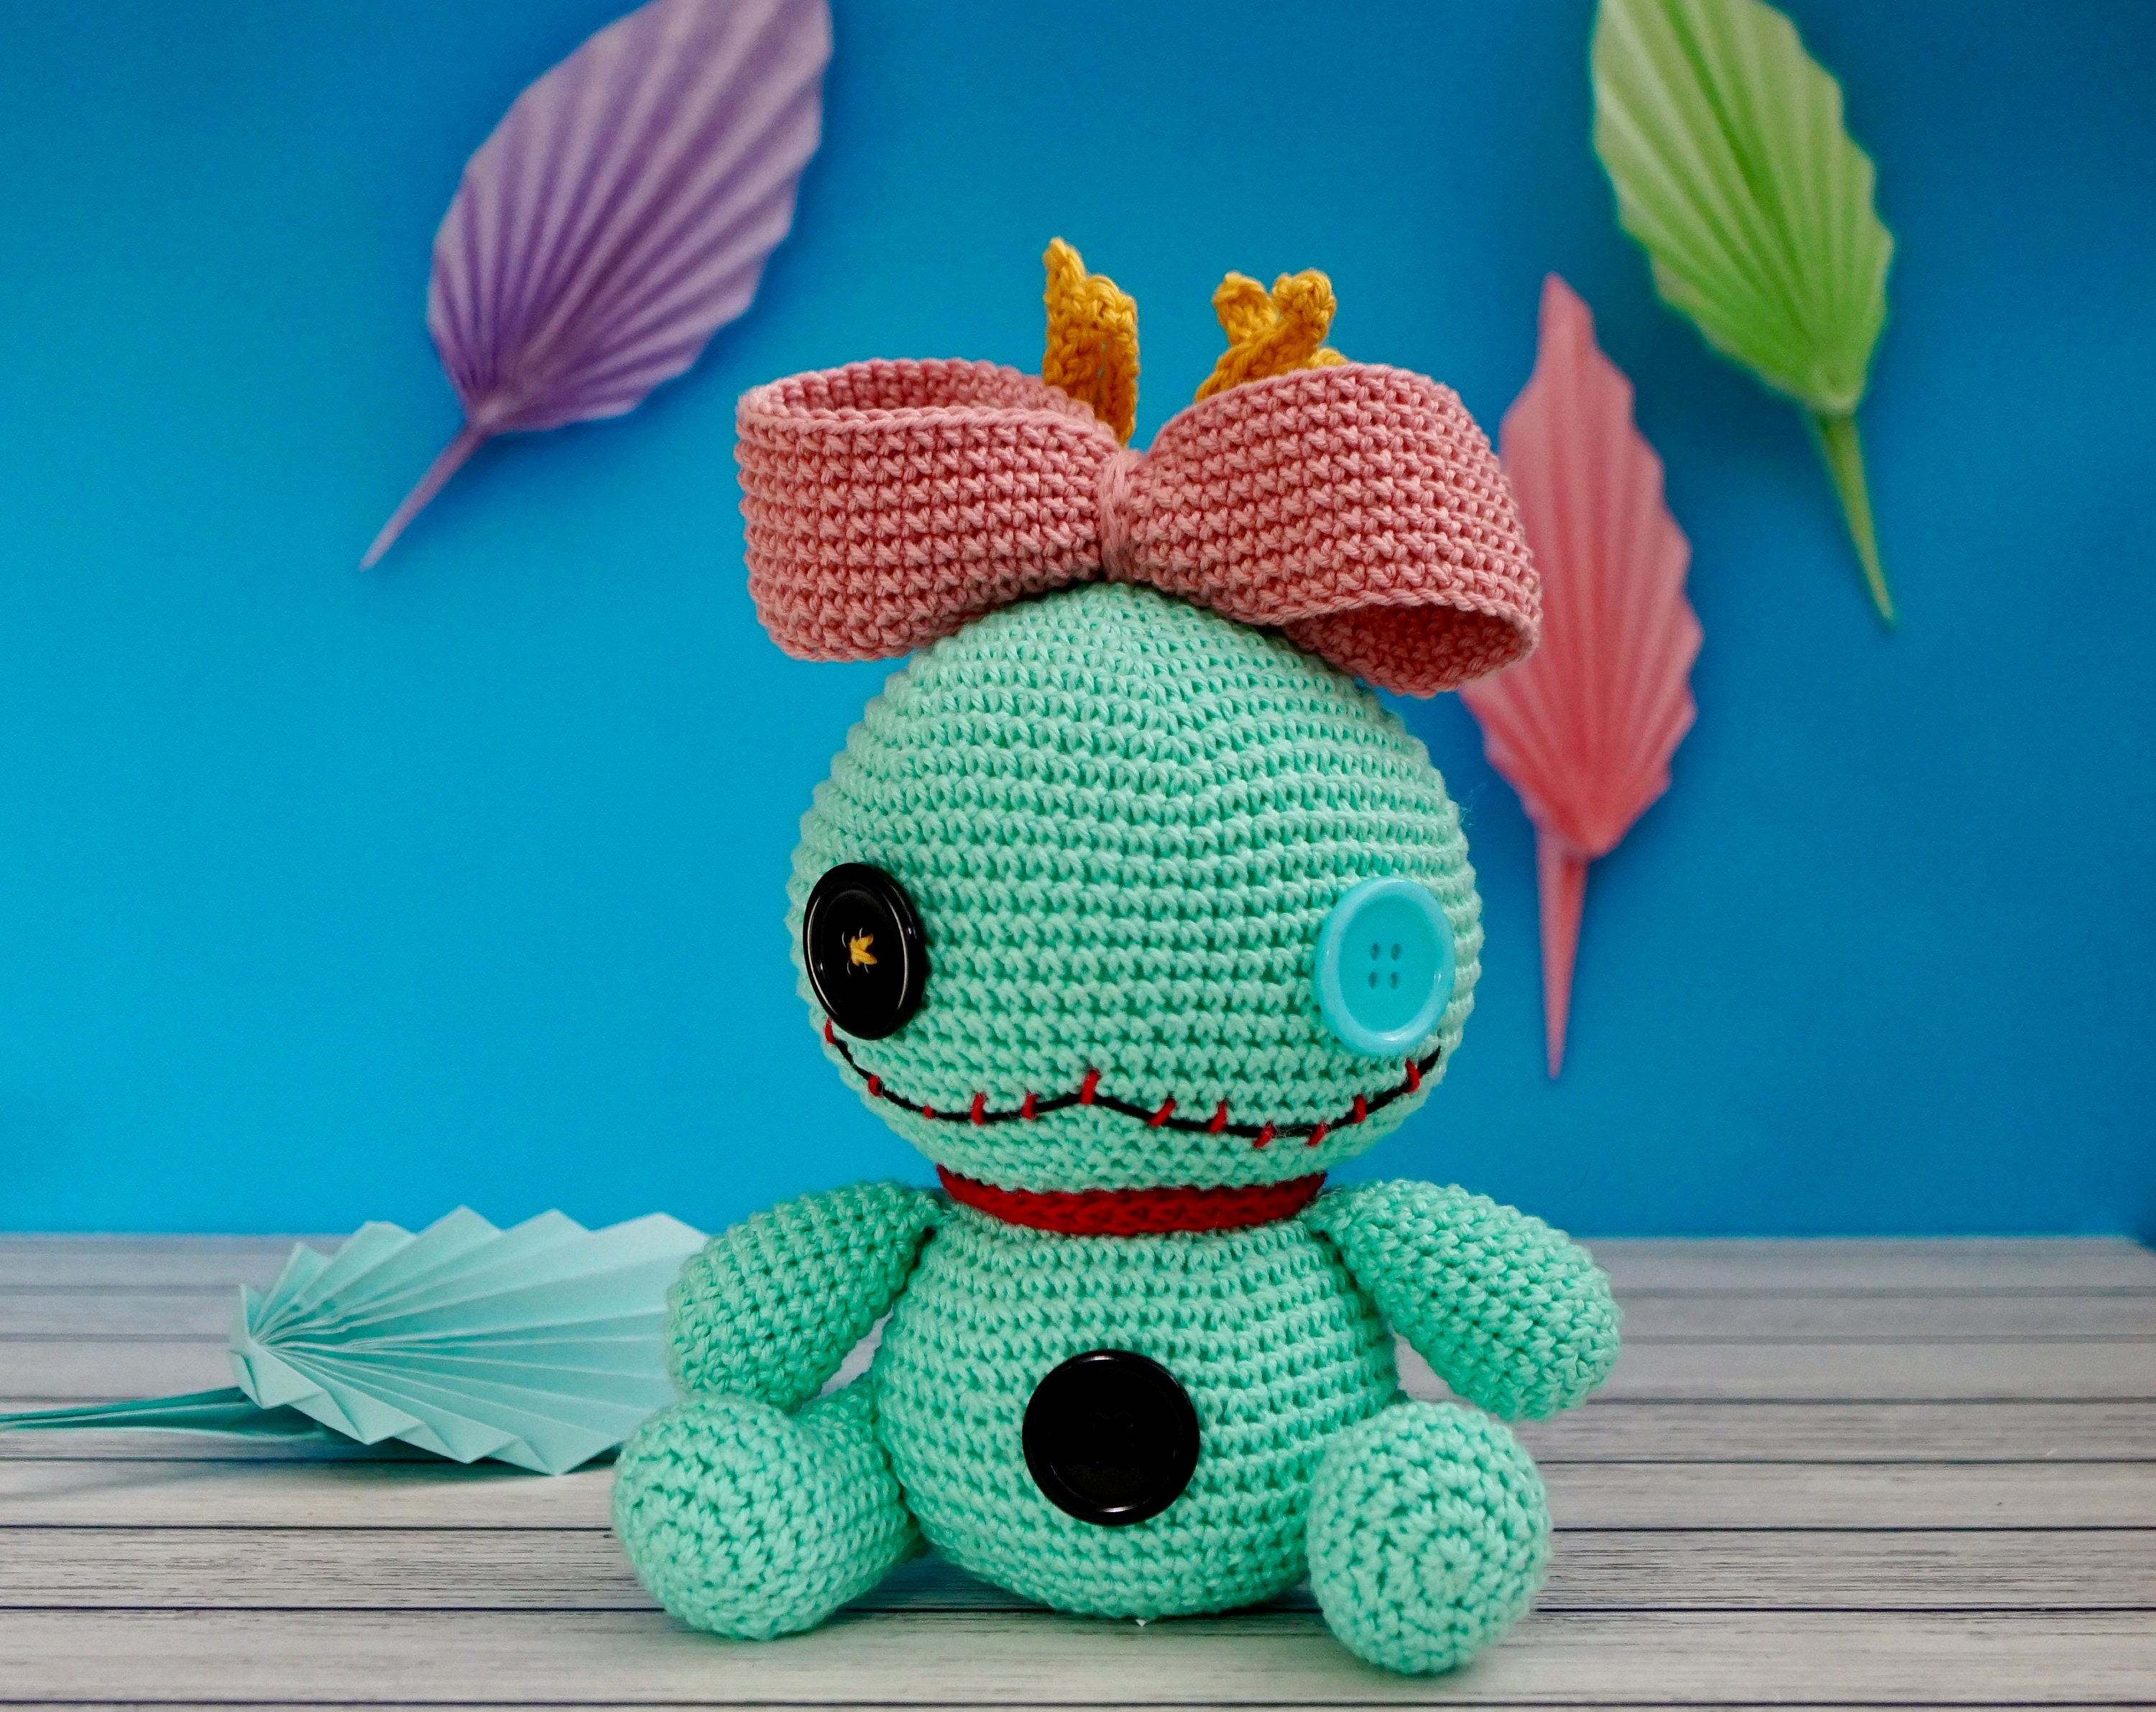 Pin by Tracee French on Lilo and stitch